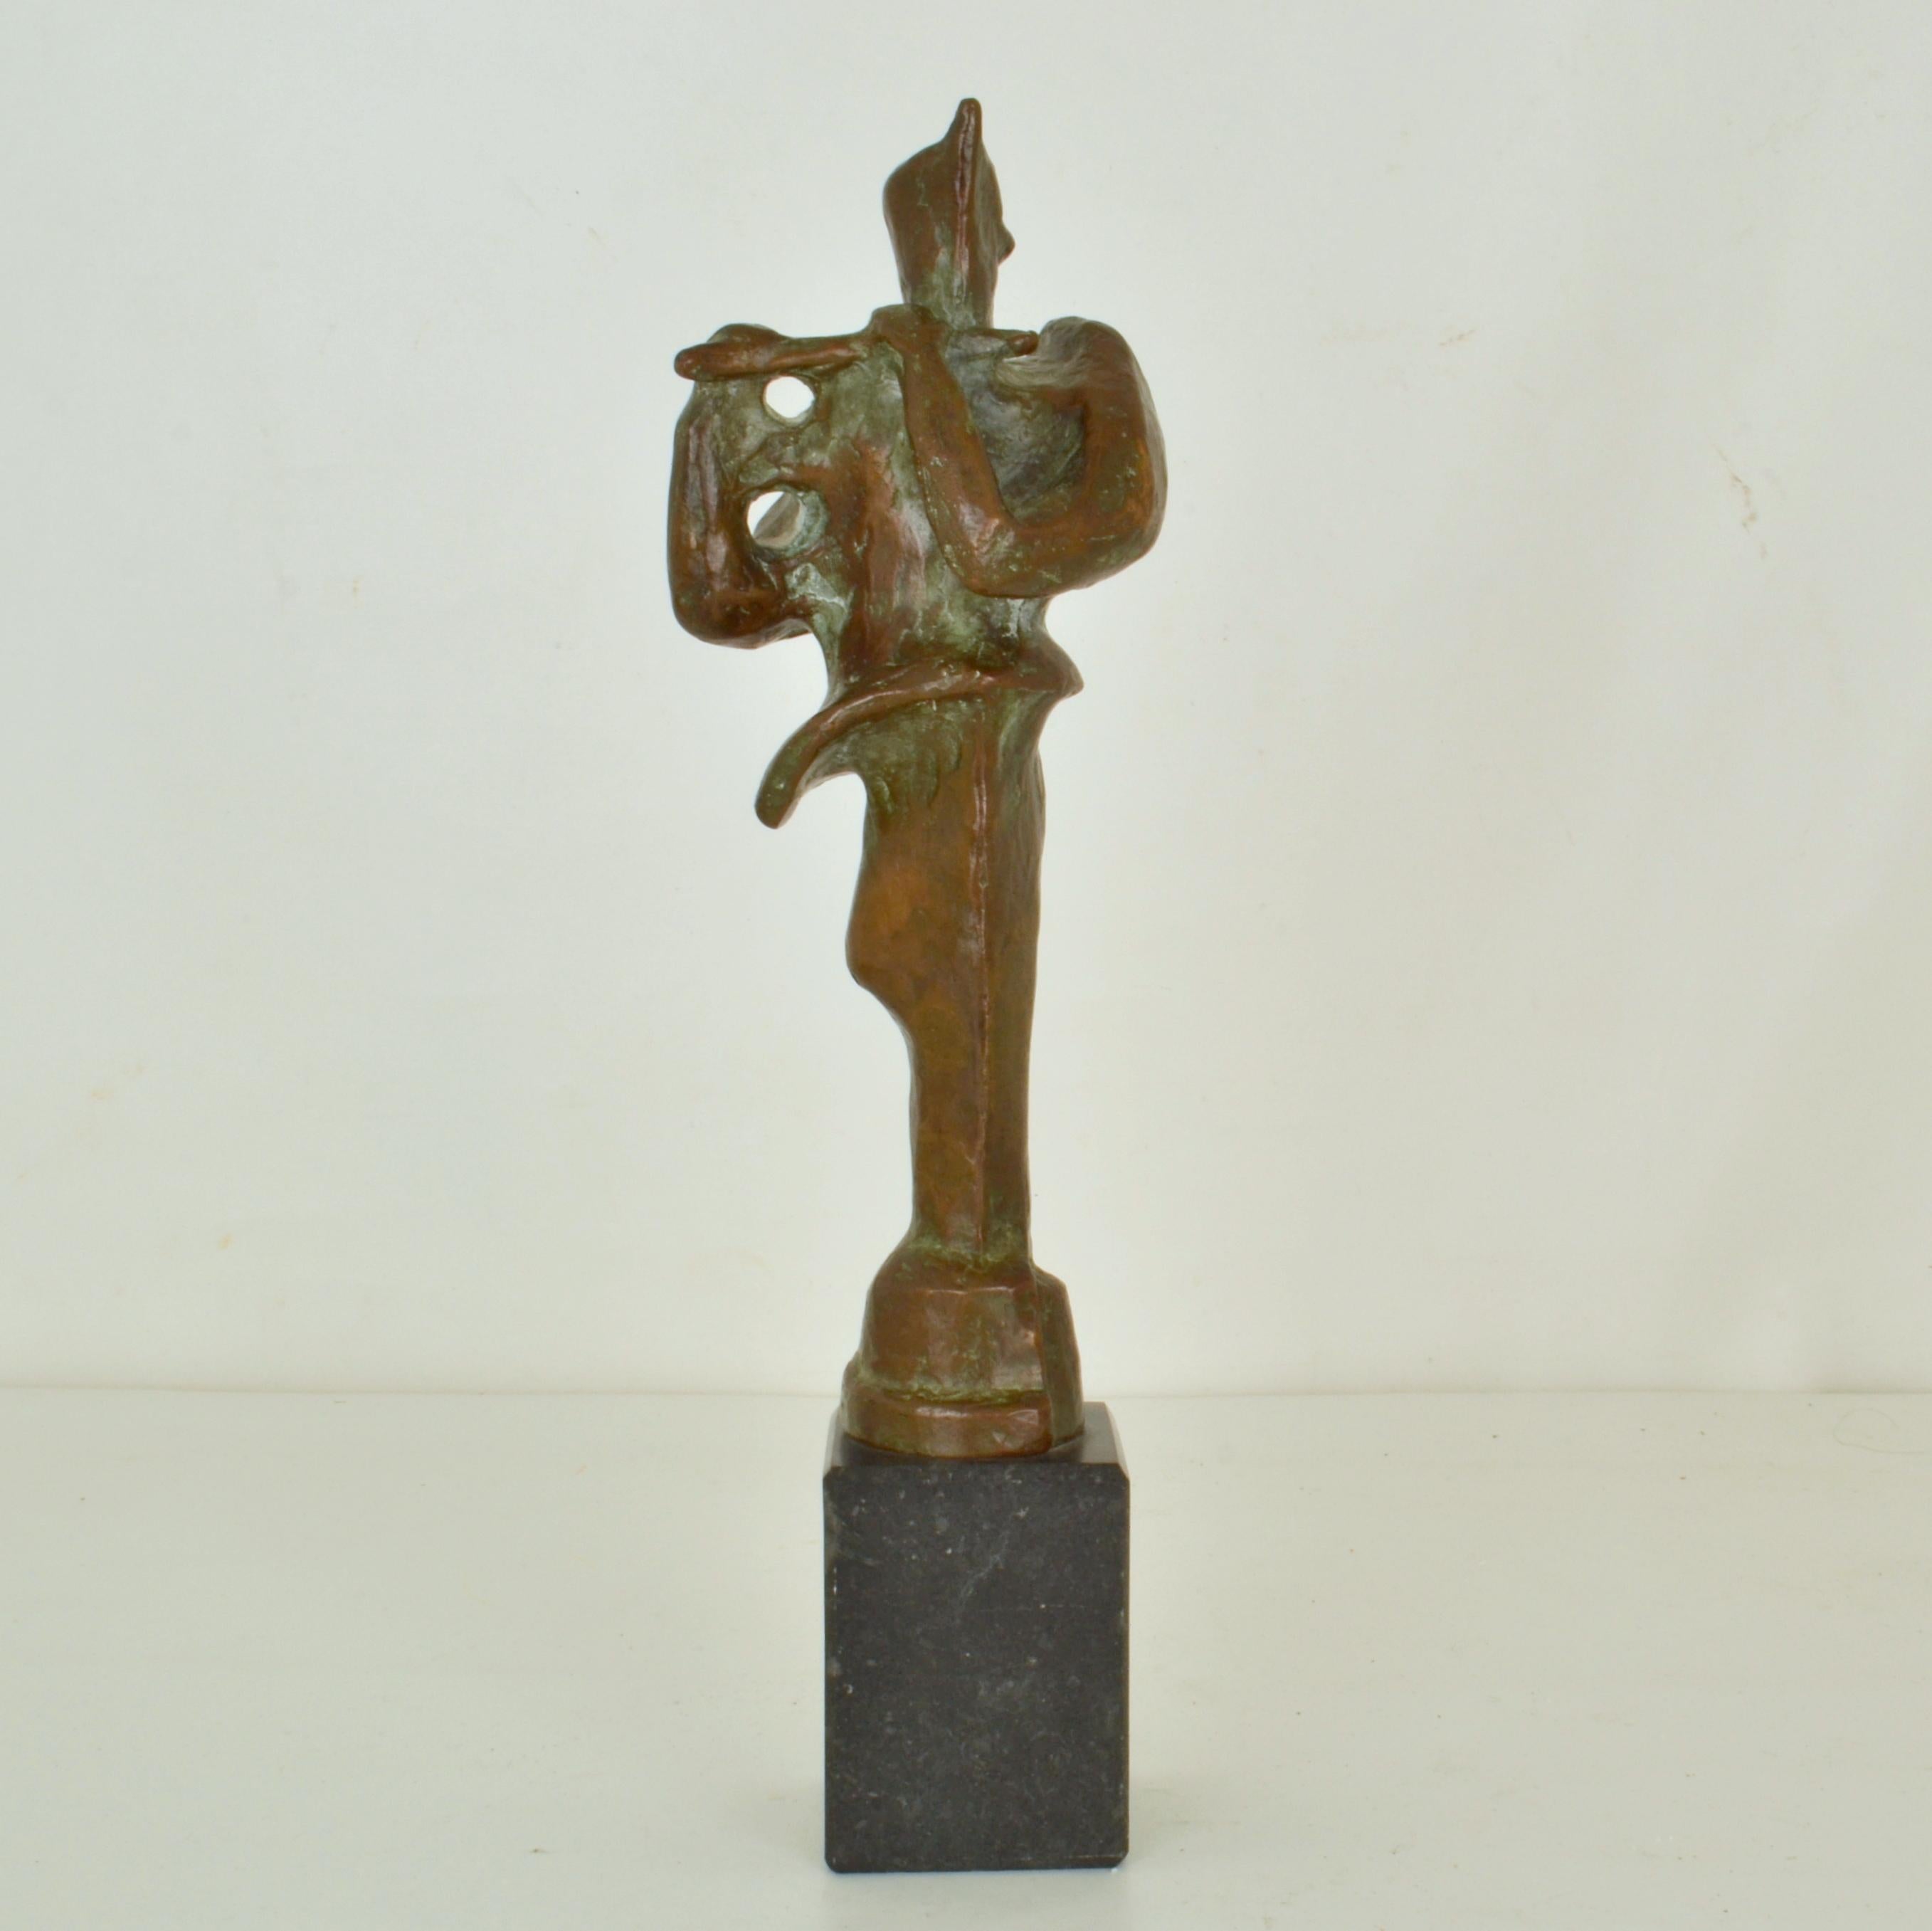 Sculpture of a flute player is cast in bronze stands on a black marble base by Adler 1960's. It is expressive with its original patina and will make a beautiful feature. 
There are many mythological stories involving the flute player. In ancient